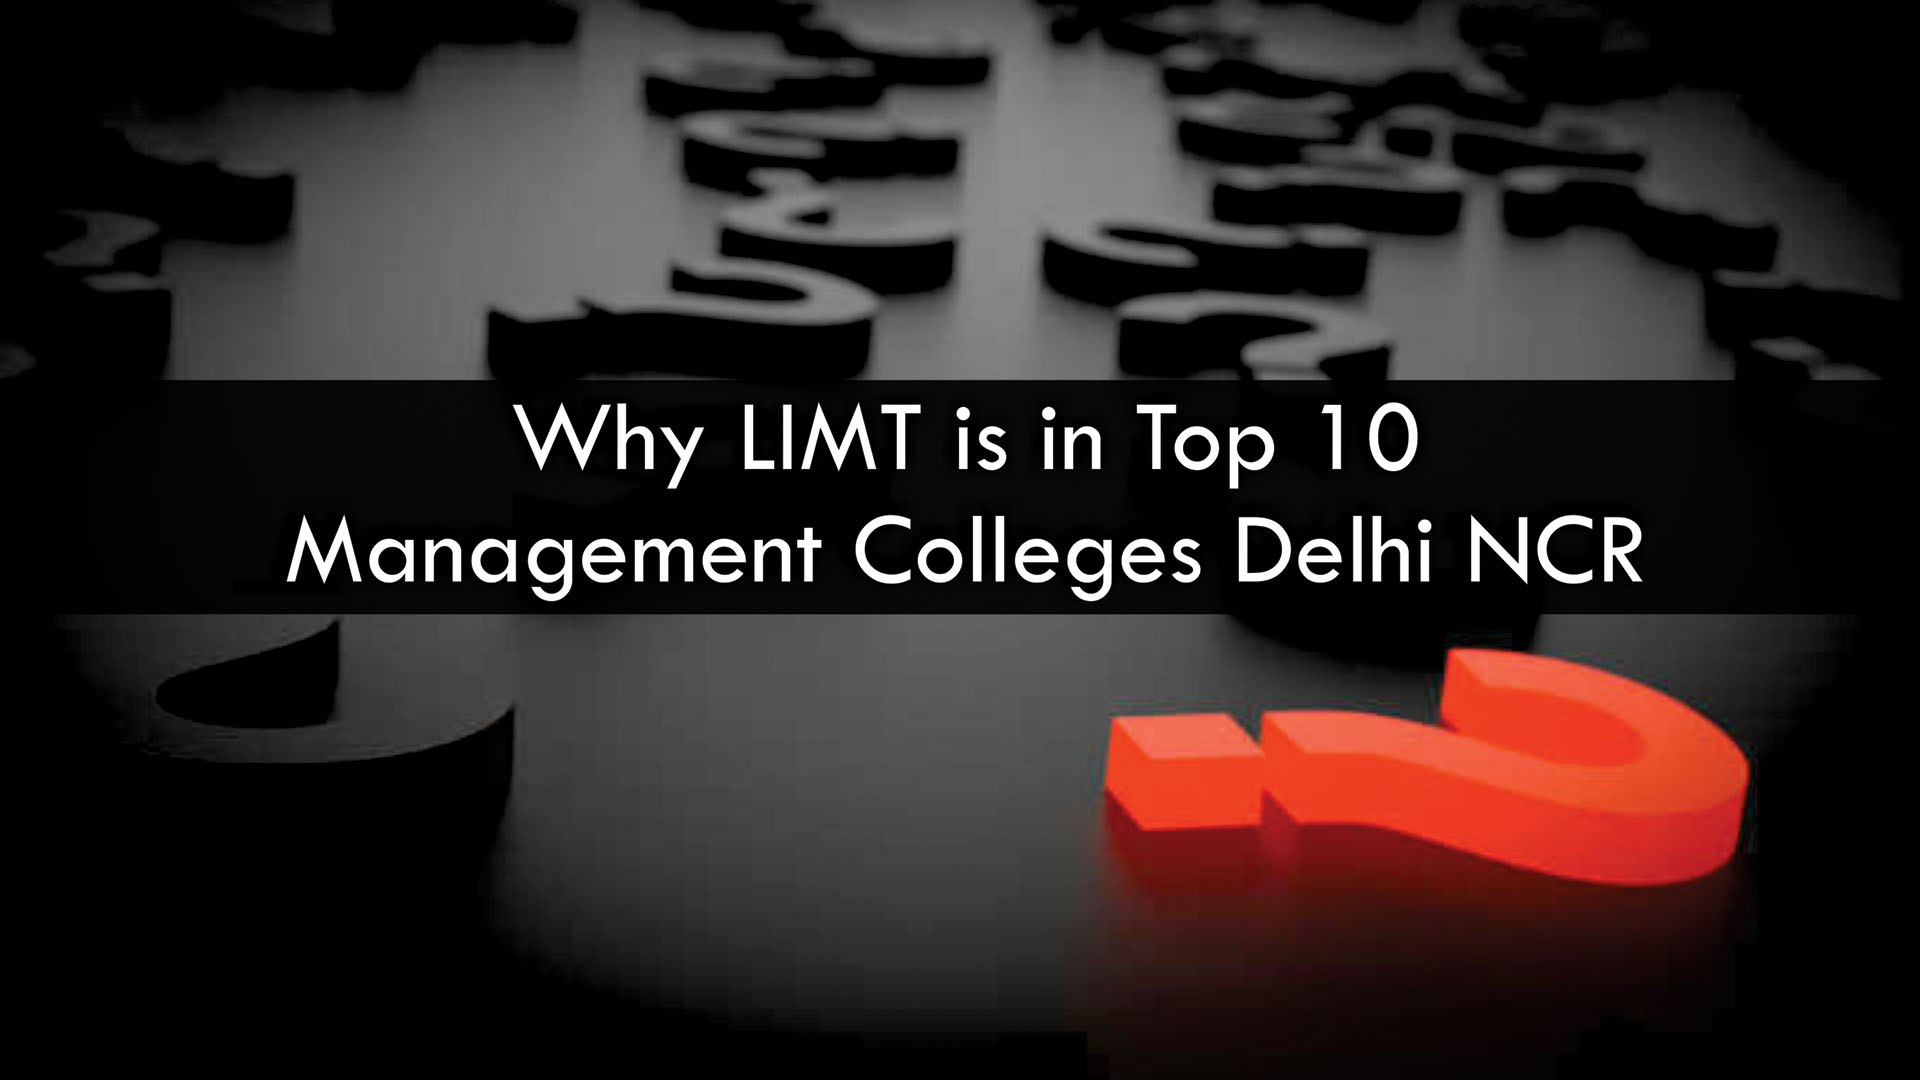 why limt is in top 10 management colleges delhi ncr